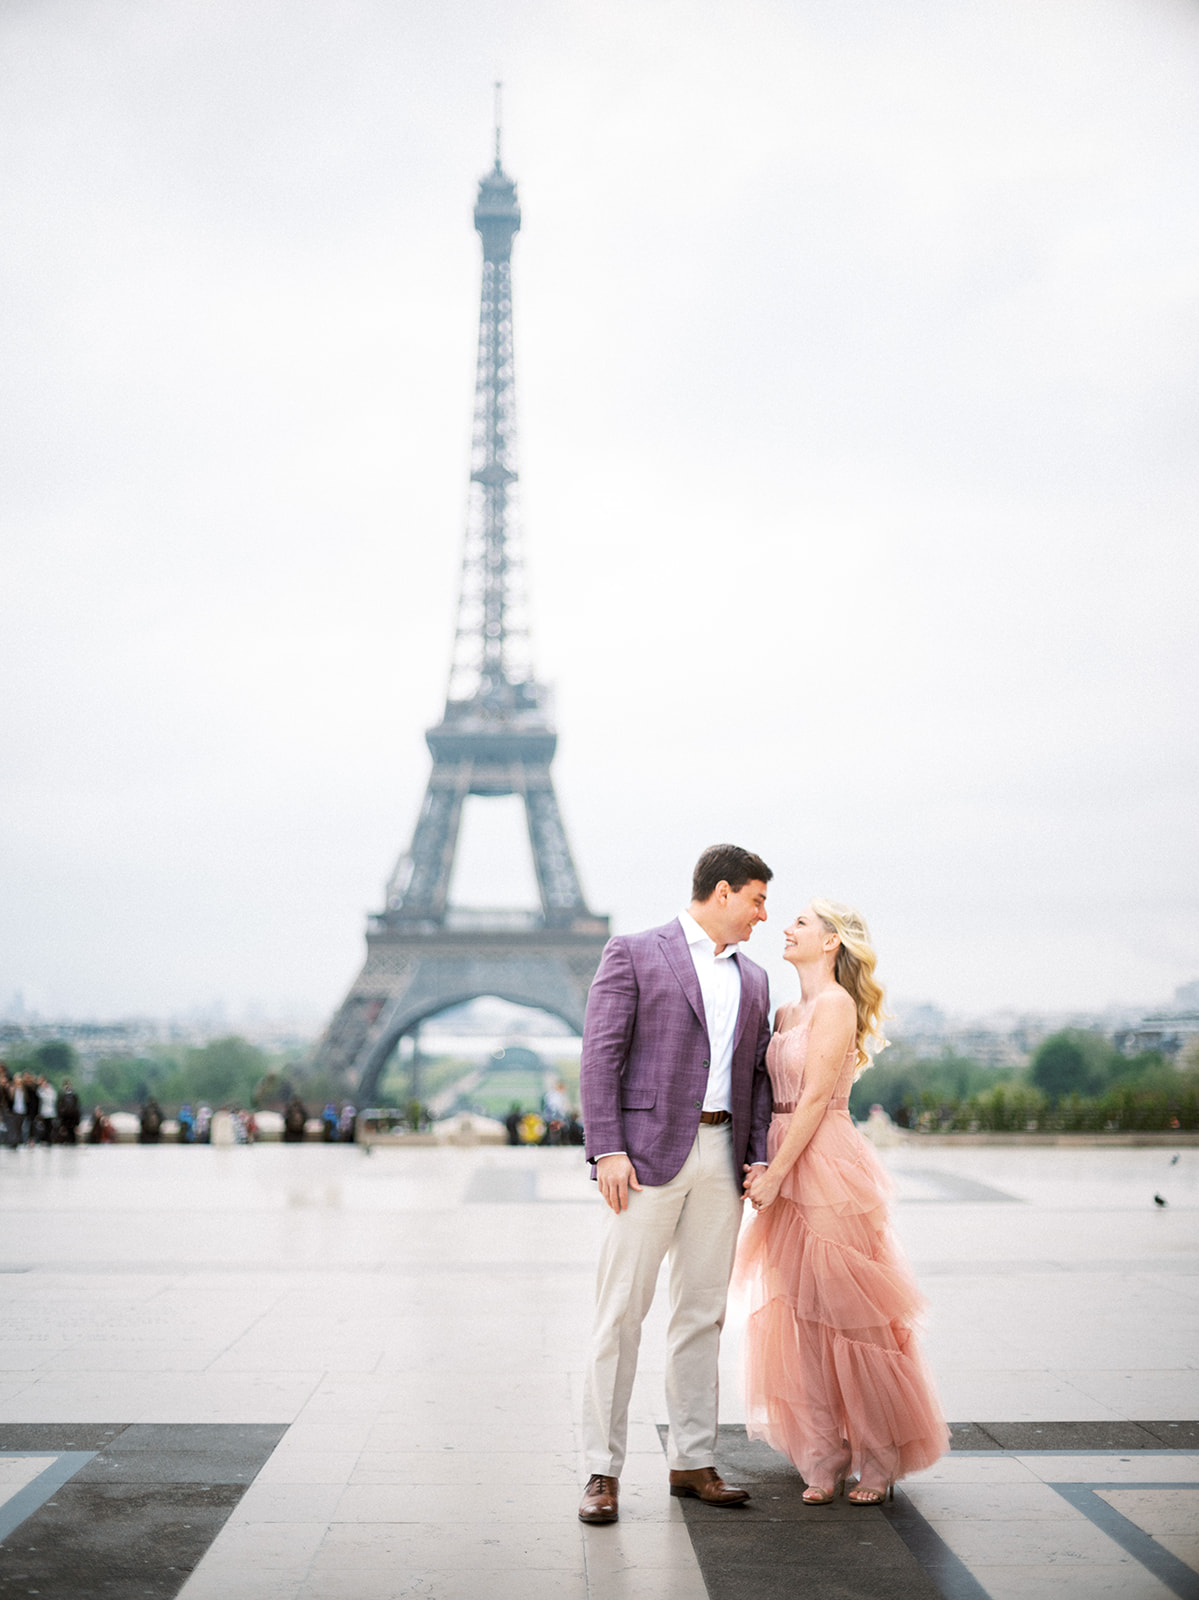 Couple looking at each other with Eiffel Tower in the background.